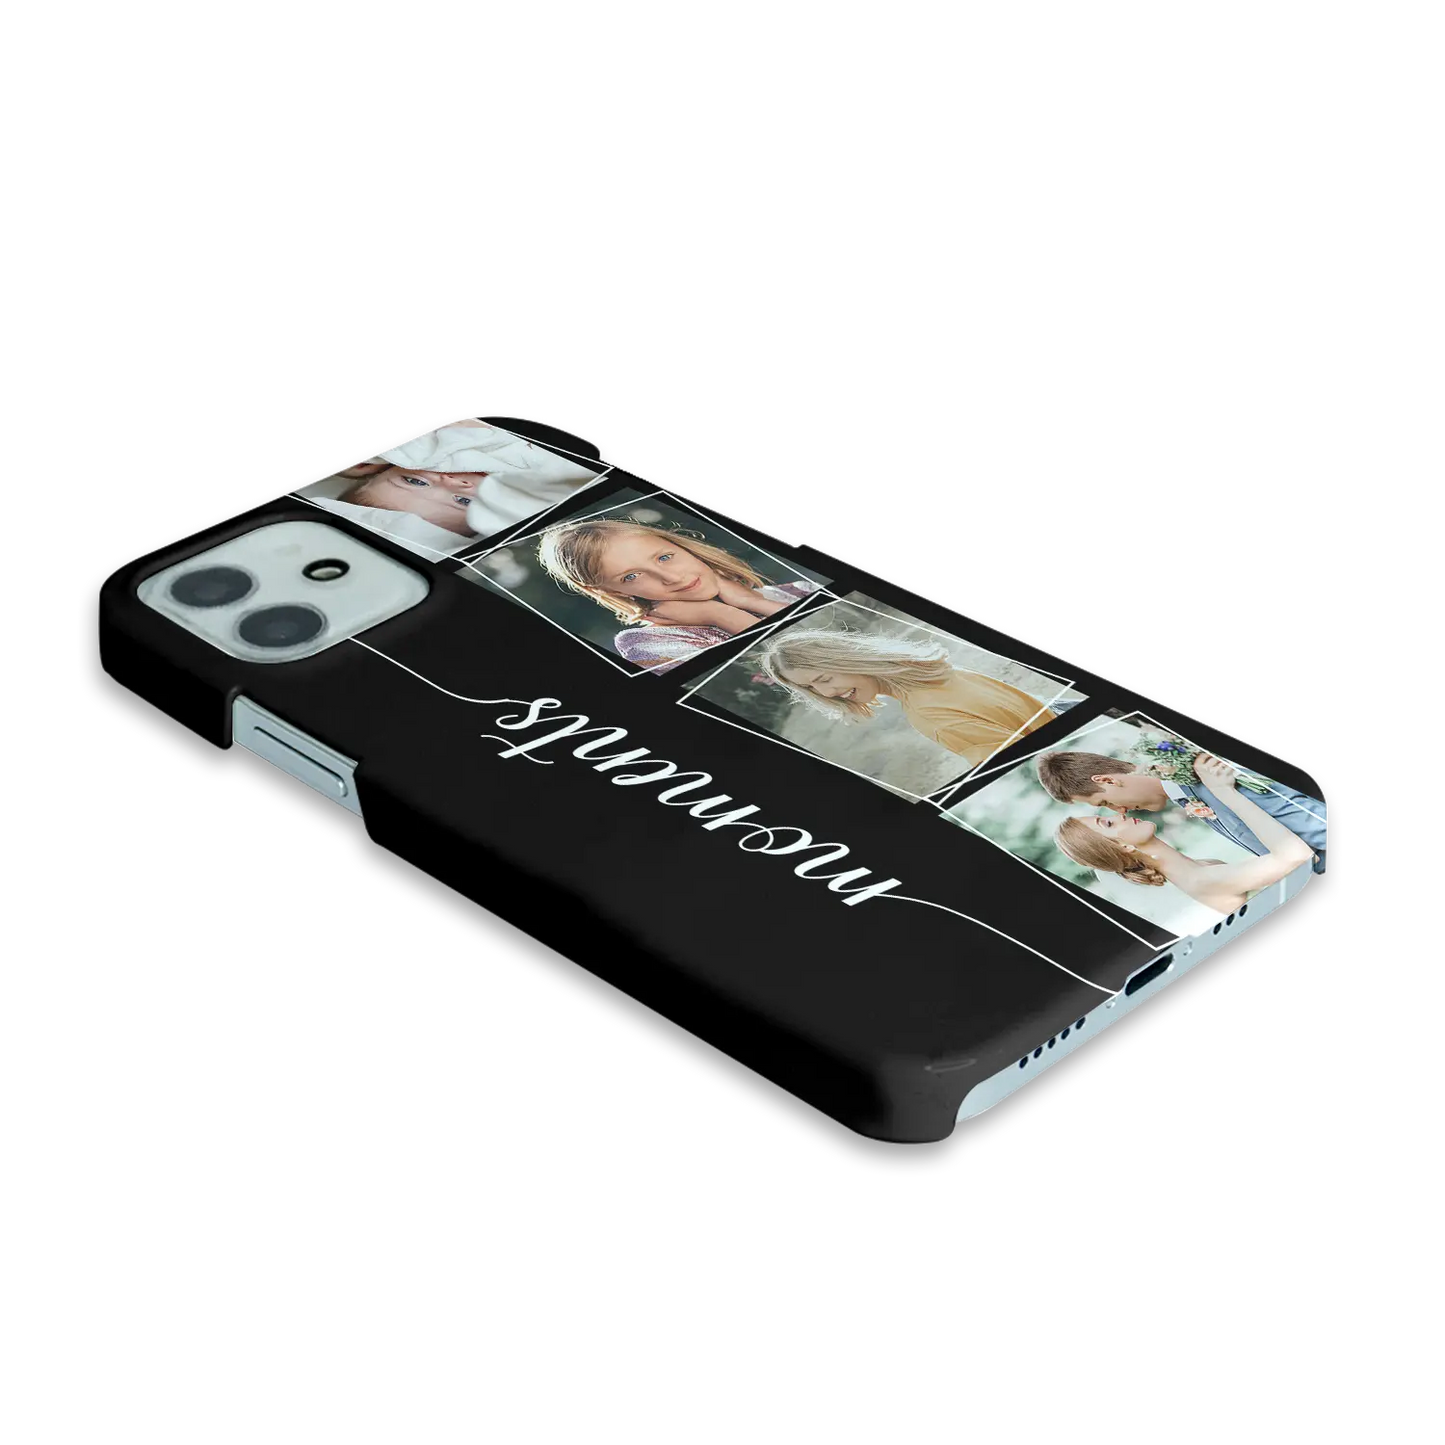 Moments - Personalised Galaxy A Case